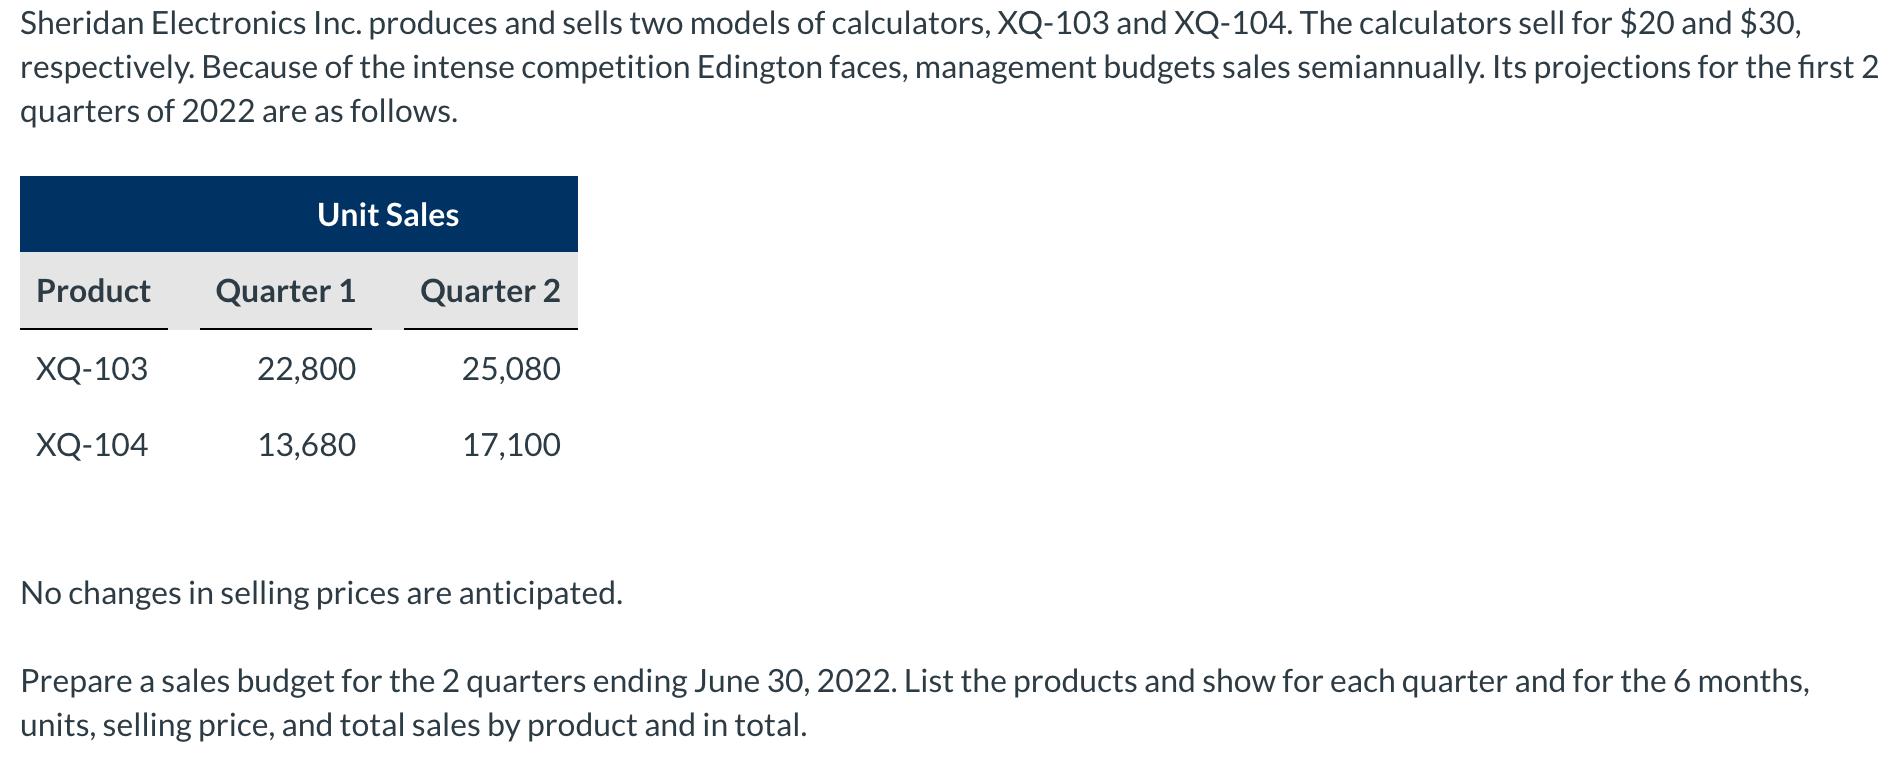 Sheridan Electronics Inc. produces and sells two models of calculators, XQ-103 and XQ-104. The calculators sell for $20 and $